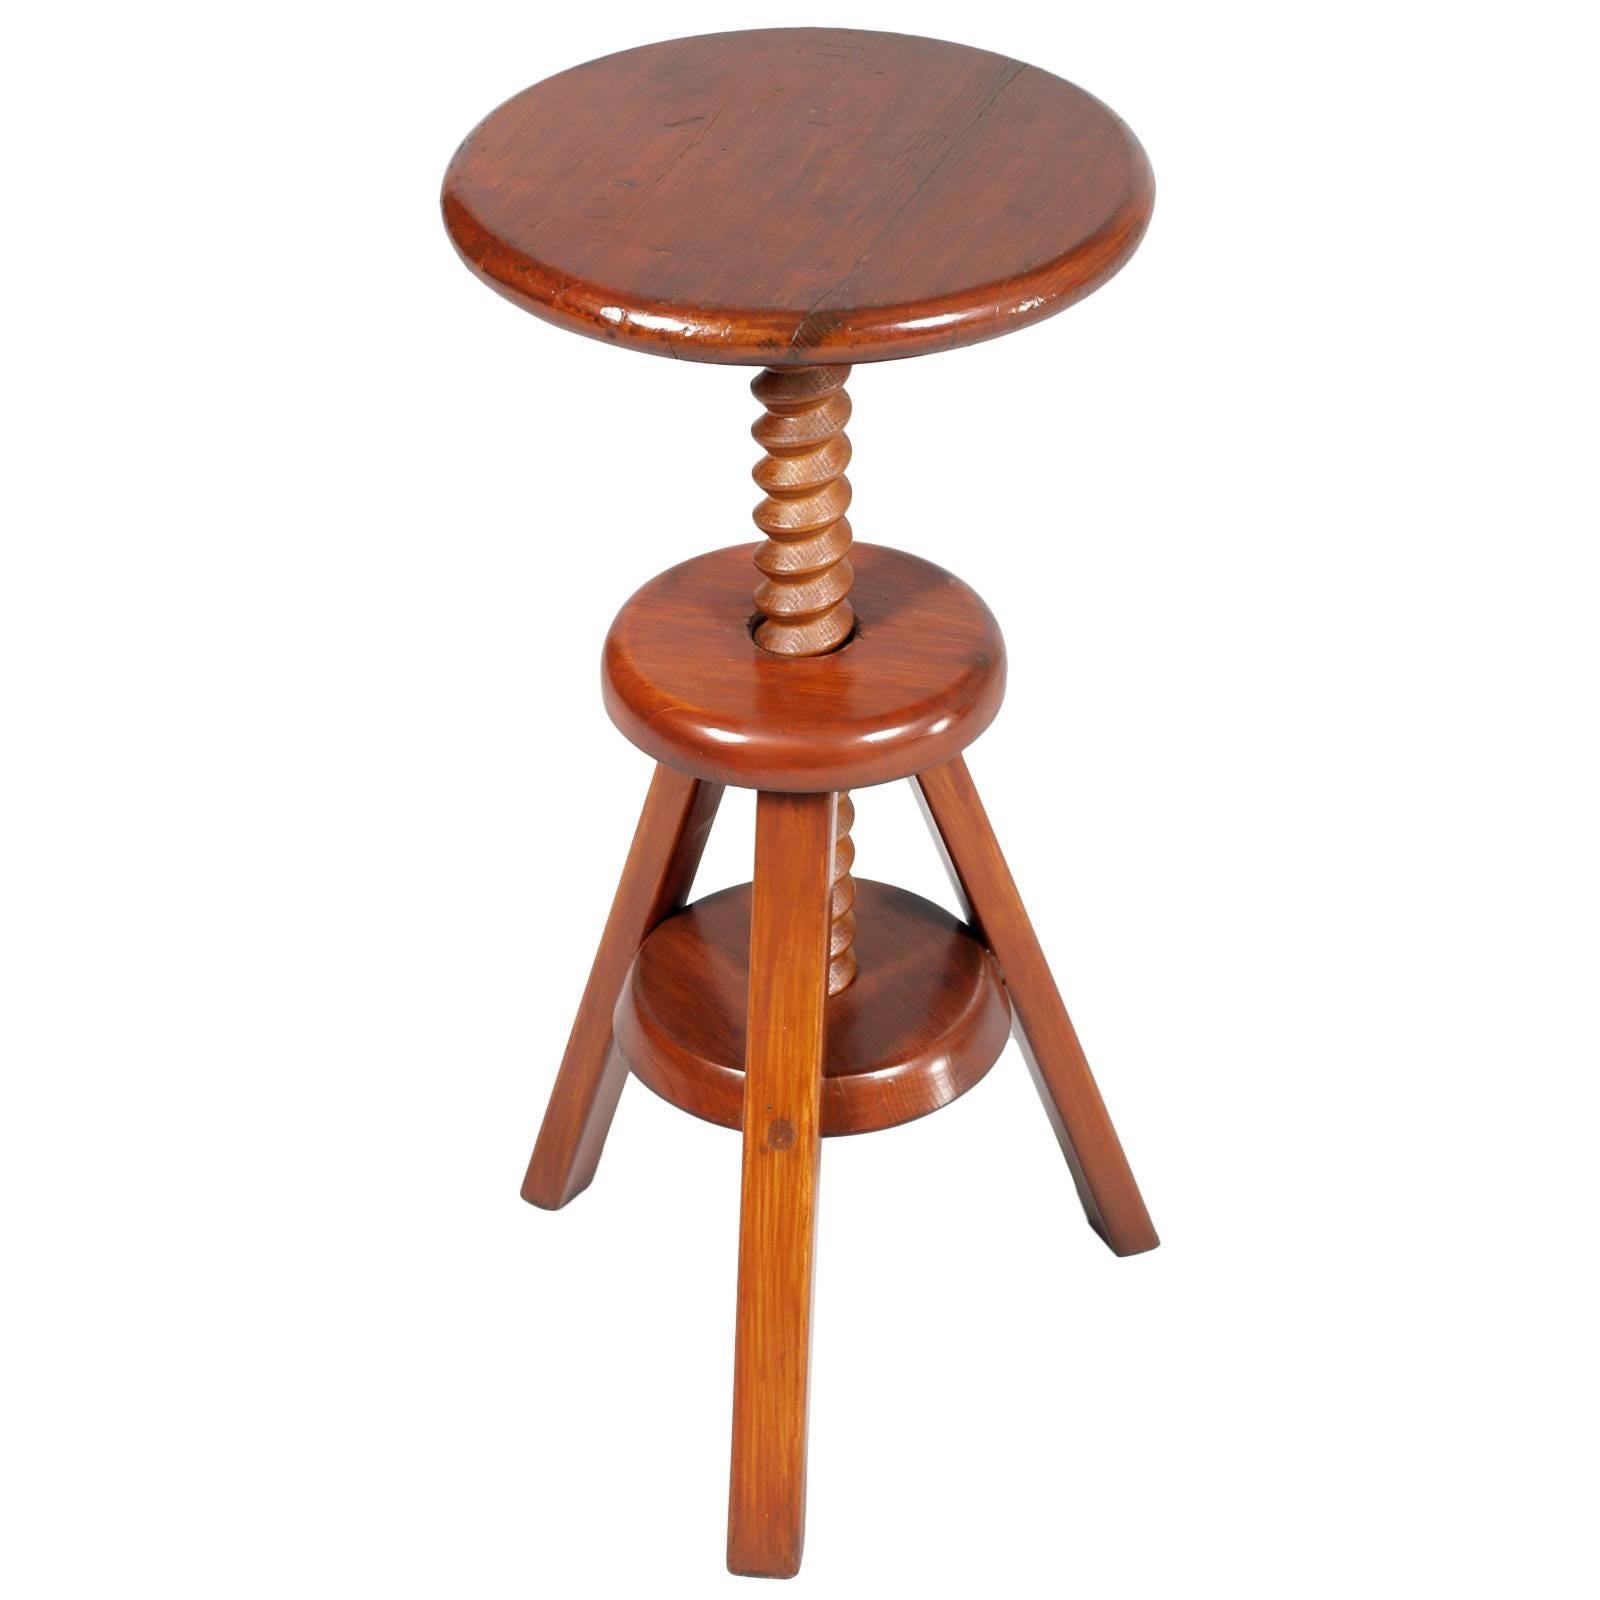 1950s Tyrolean adjustable tripod stool, in red larch polished to wax

Measures cm: Height 45/60, diameter 32.